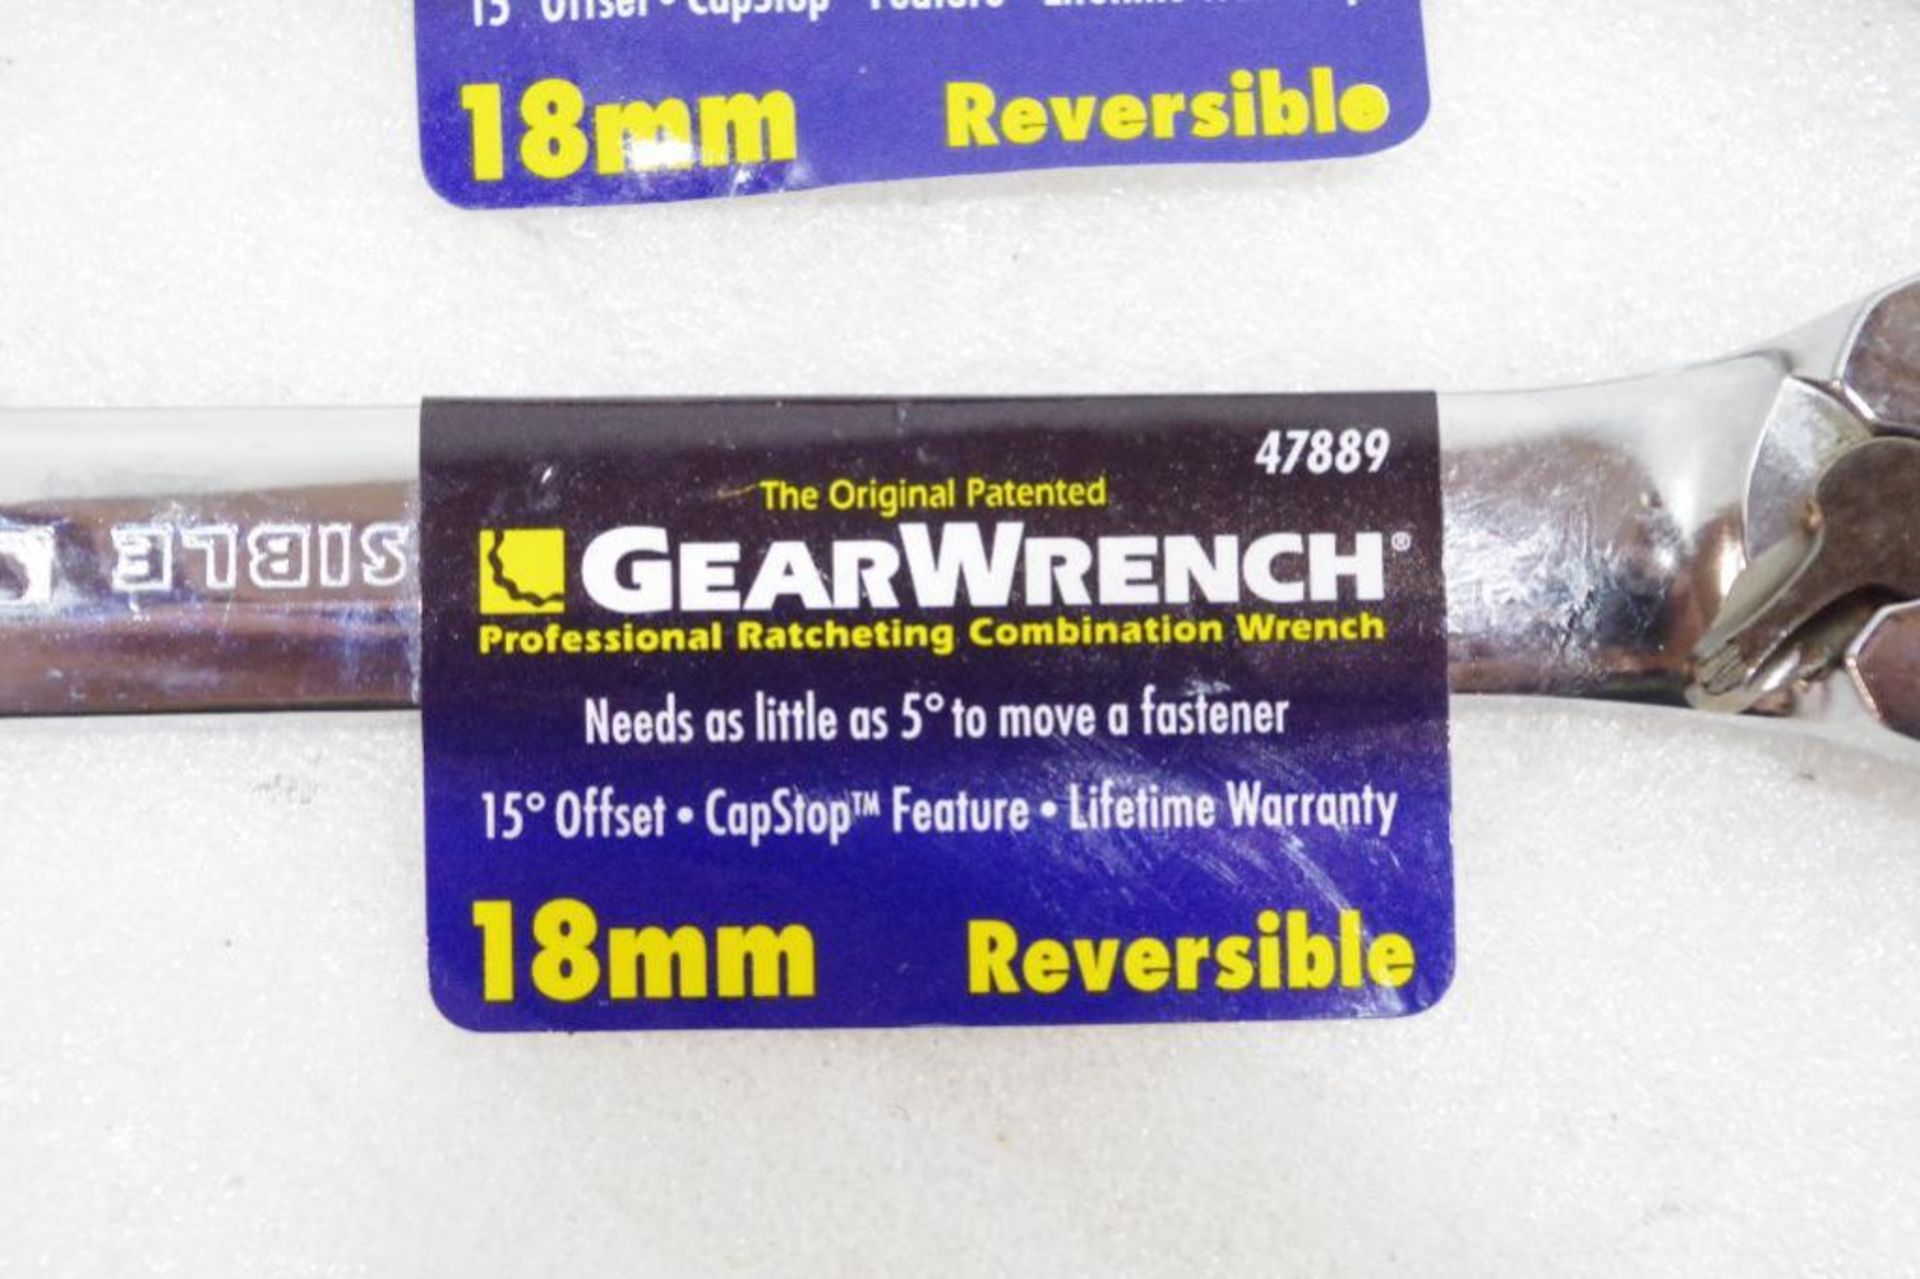 [10] NEW GEAR WRENCH 18mm Reversible Professional Ratcheting Combination Wrenches - Image 4 of 4